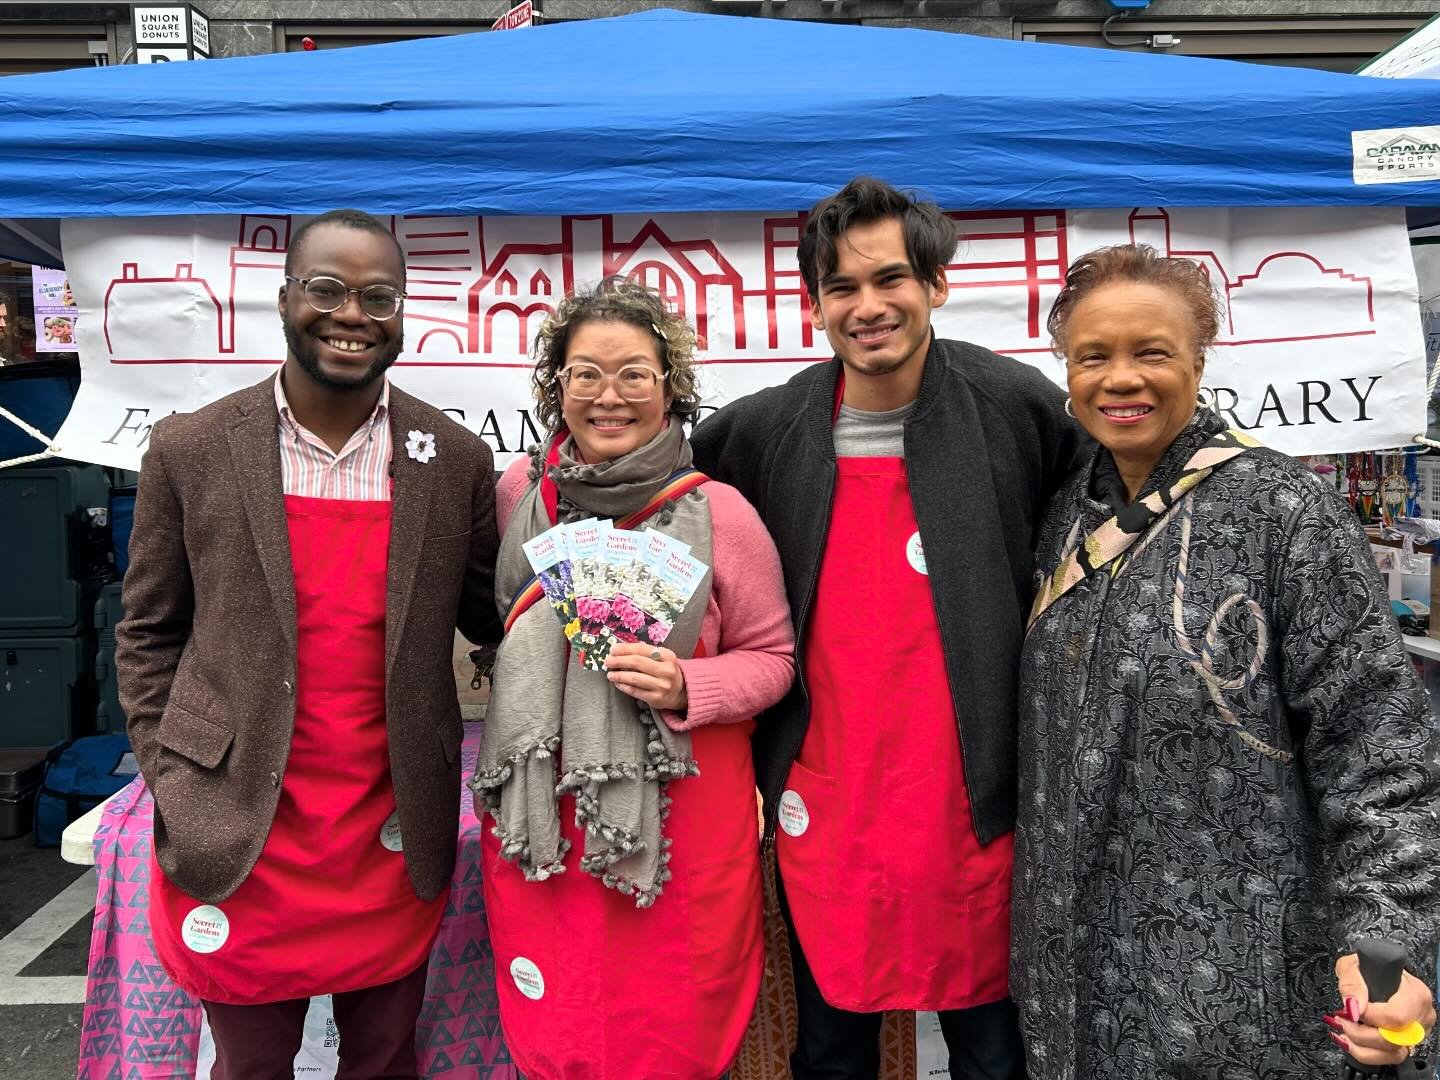 We met Mayor Simmons on Sunday when she stopped by our booth to see what we were up to&hellip; promoting the 2024 Secret Gardens of Cambridge! 
.
.
.
.
.
#harvardsquare #cambridgema #2024secretgardensofcambridgema